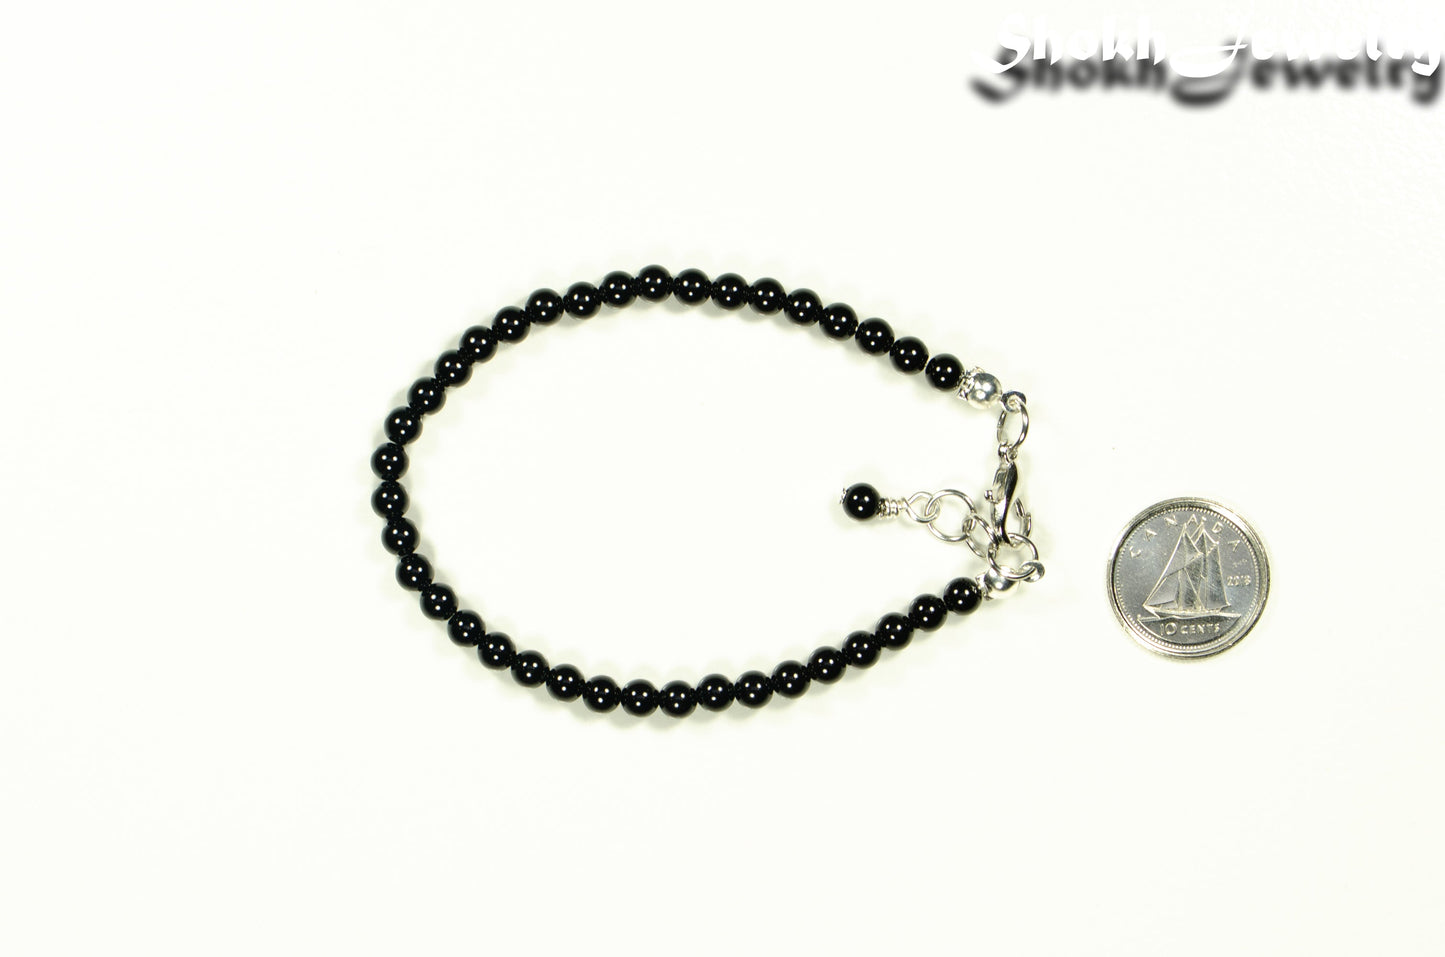 4mm Black Obsidian Crystal Bracelet with Clasp beside a dime.